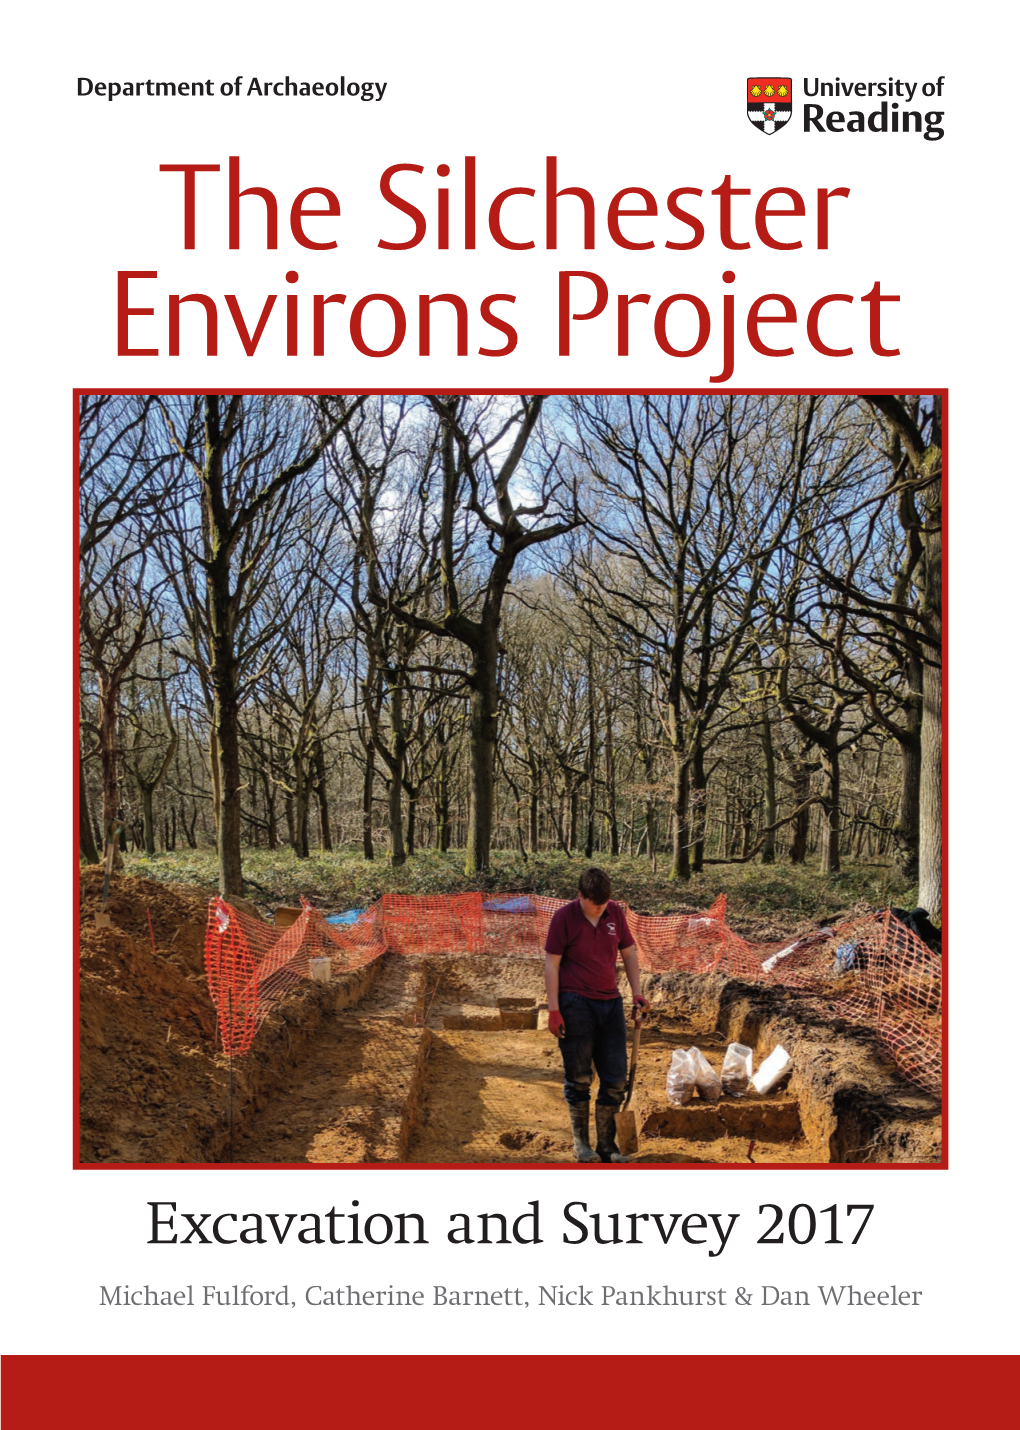 Excavation and Survey 2017